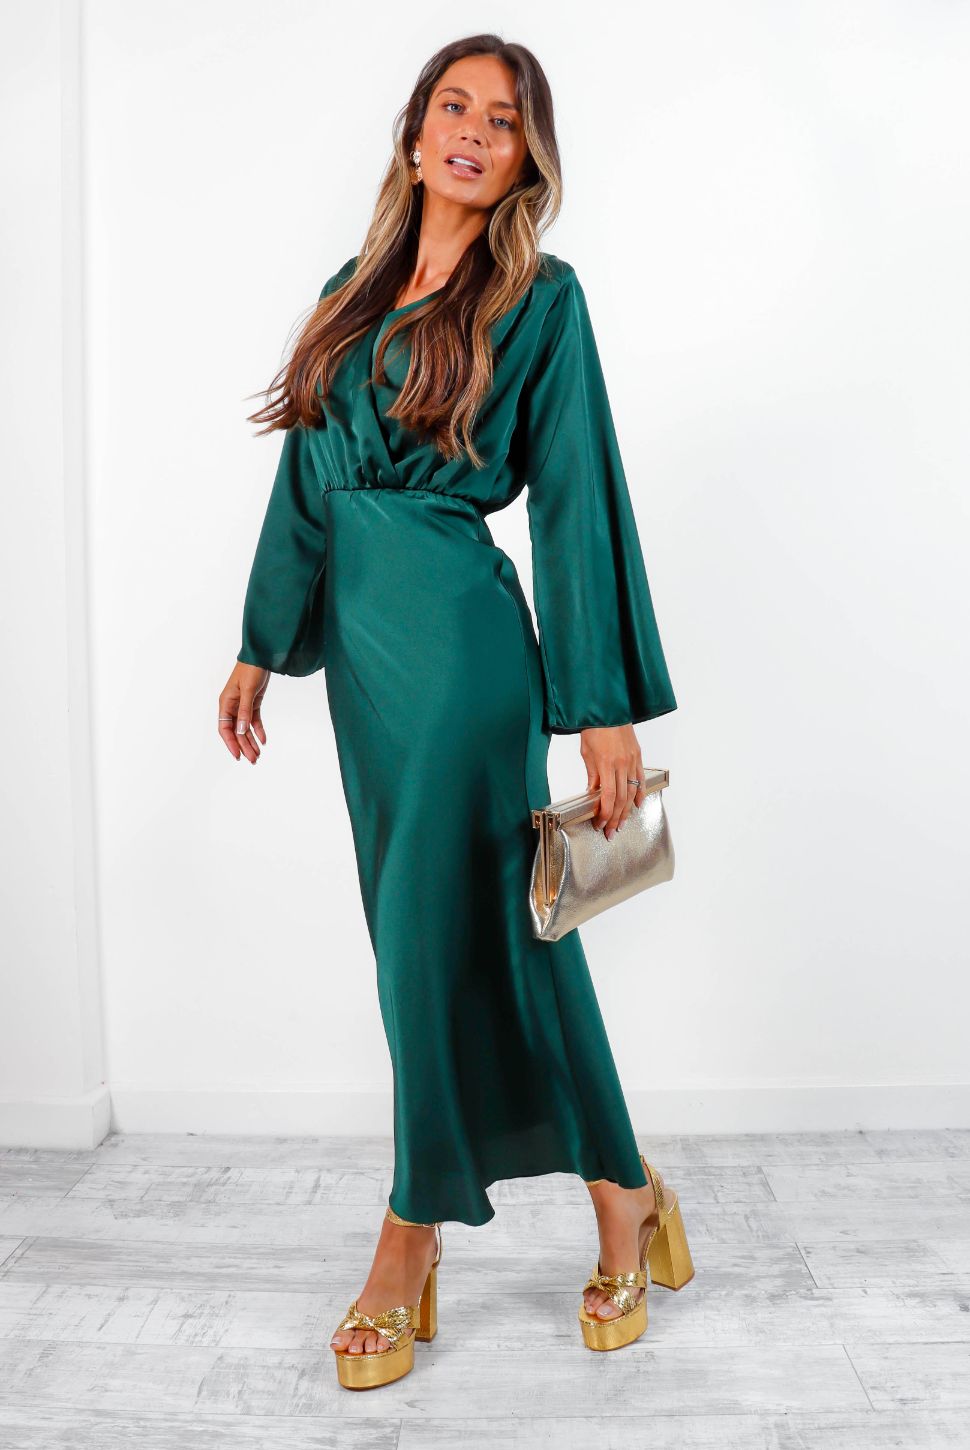 Hold that Pose Emerald Green Satin Jumpsuit